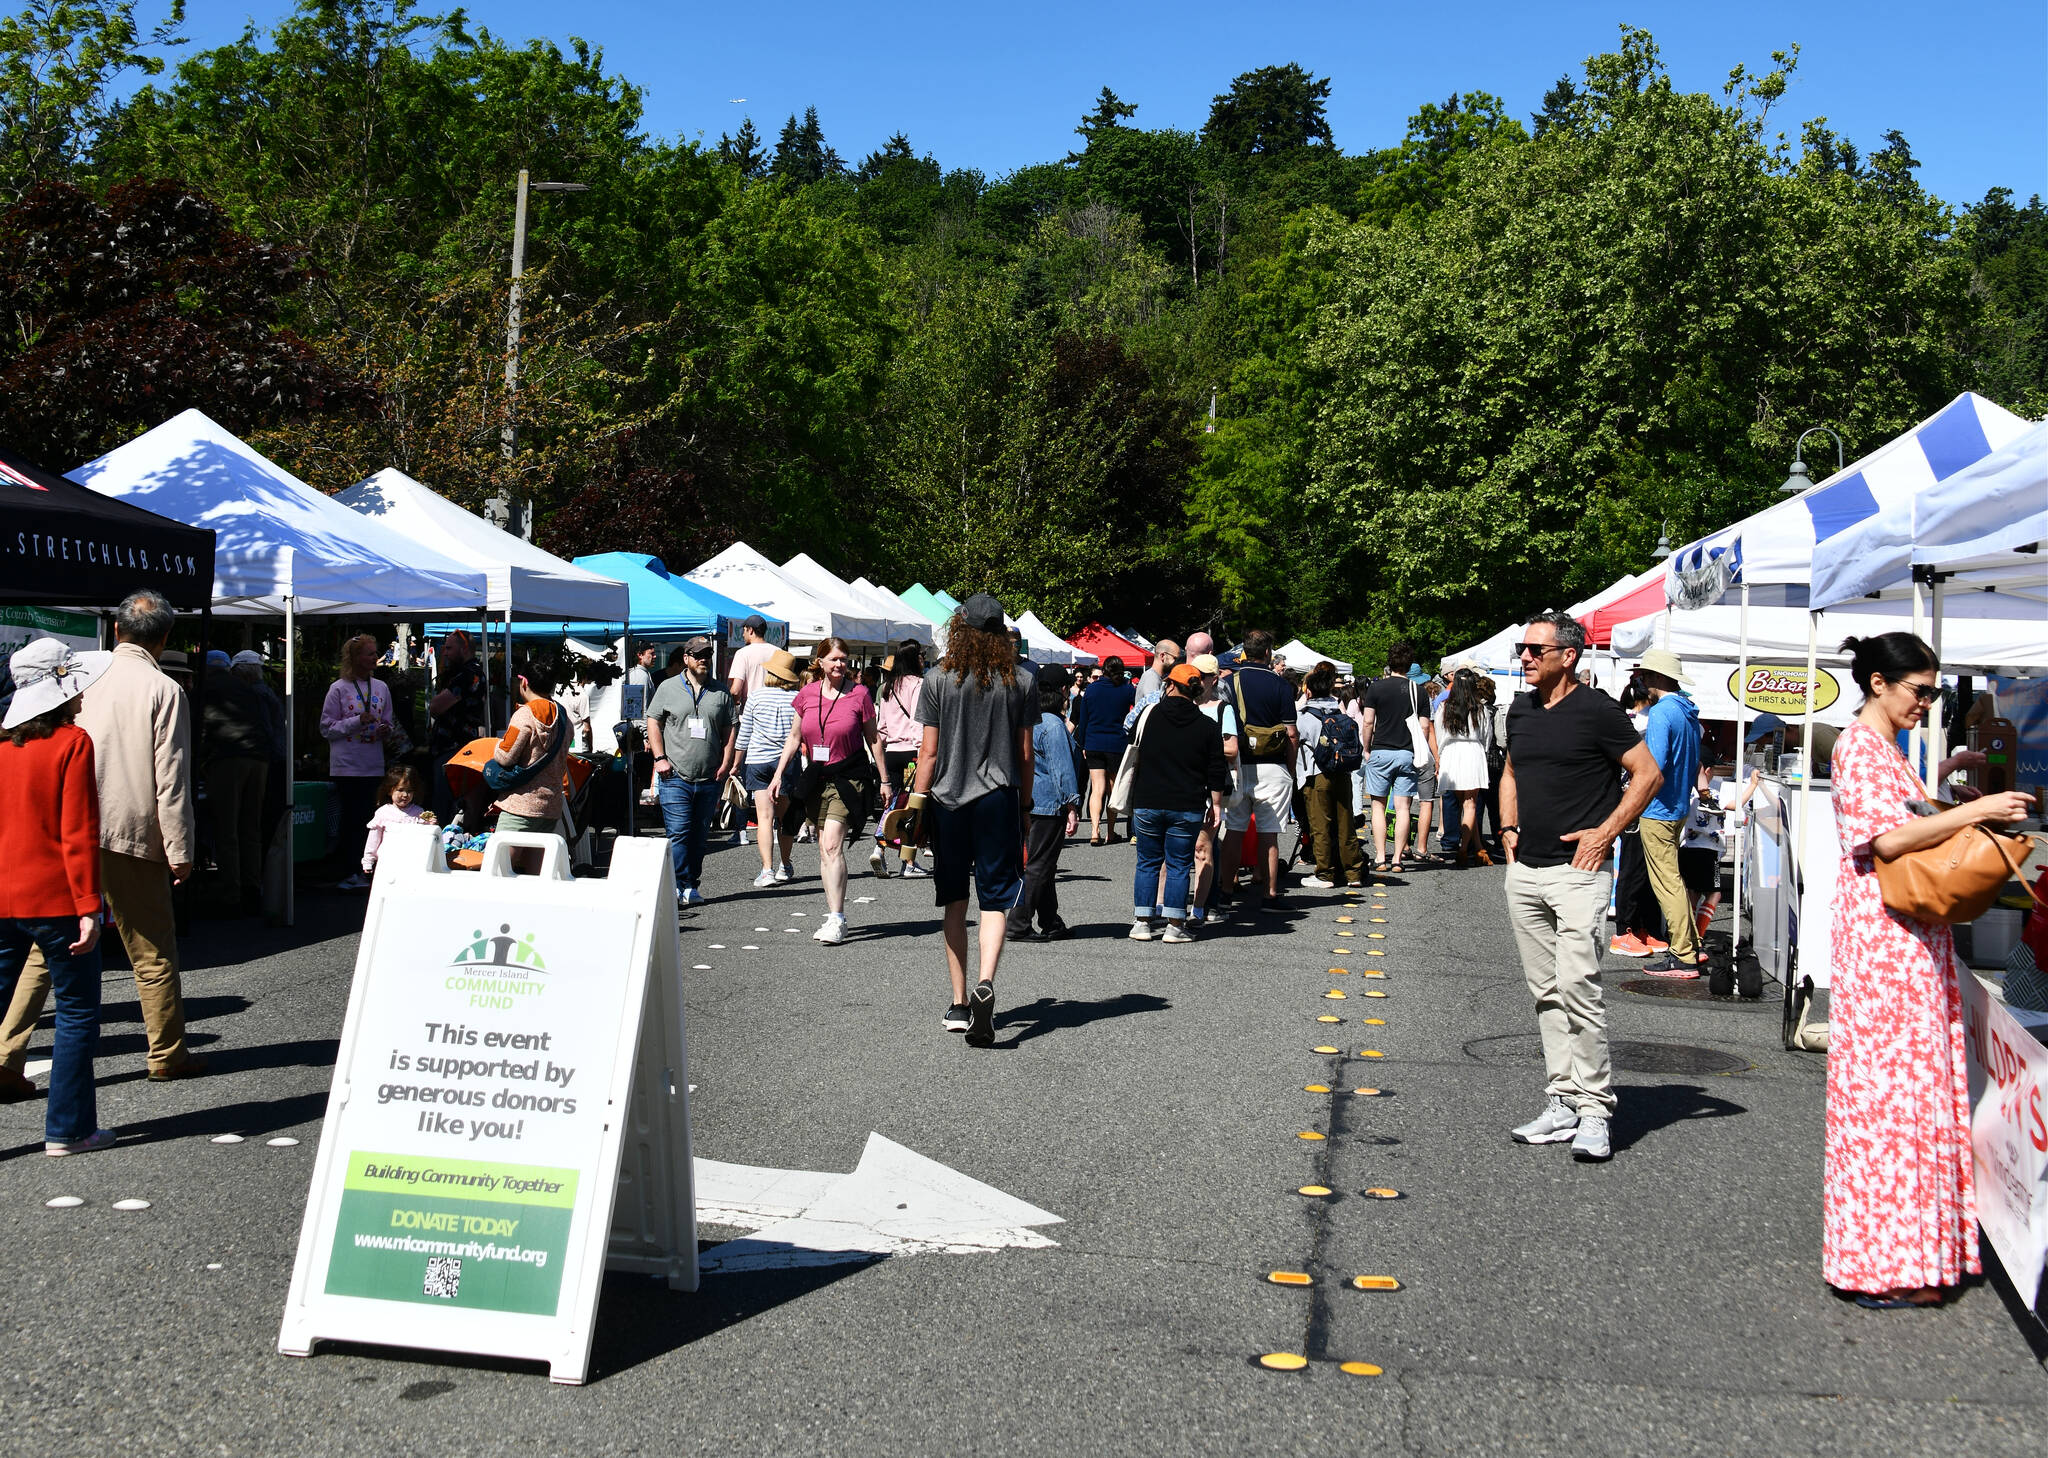 Attendees enjoy the opening day of the Mercer Island Farmers Market on June 4. Andy Nystrom/ staff photo